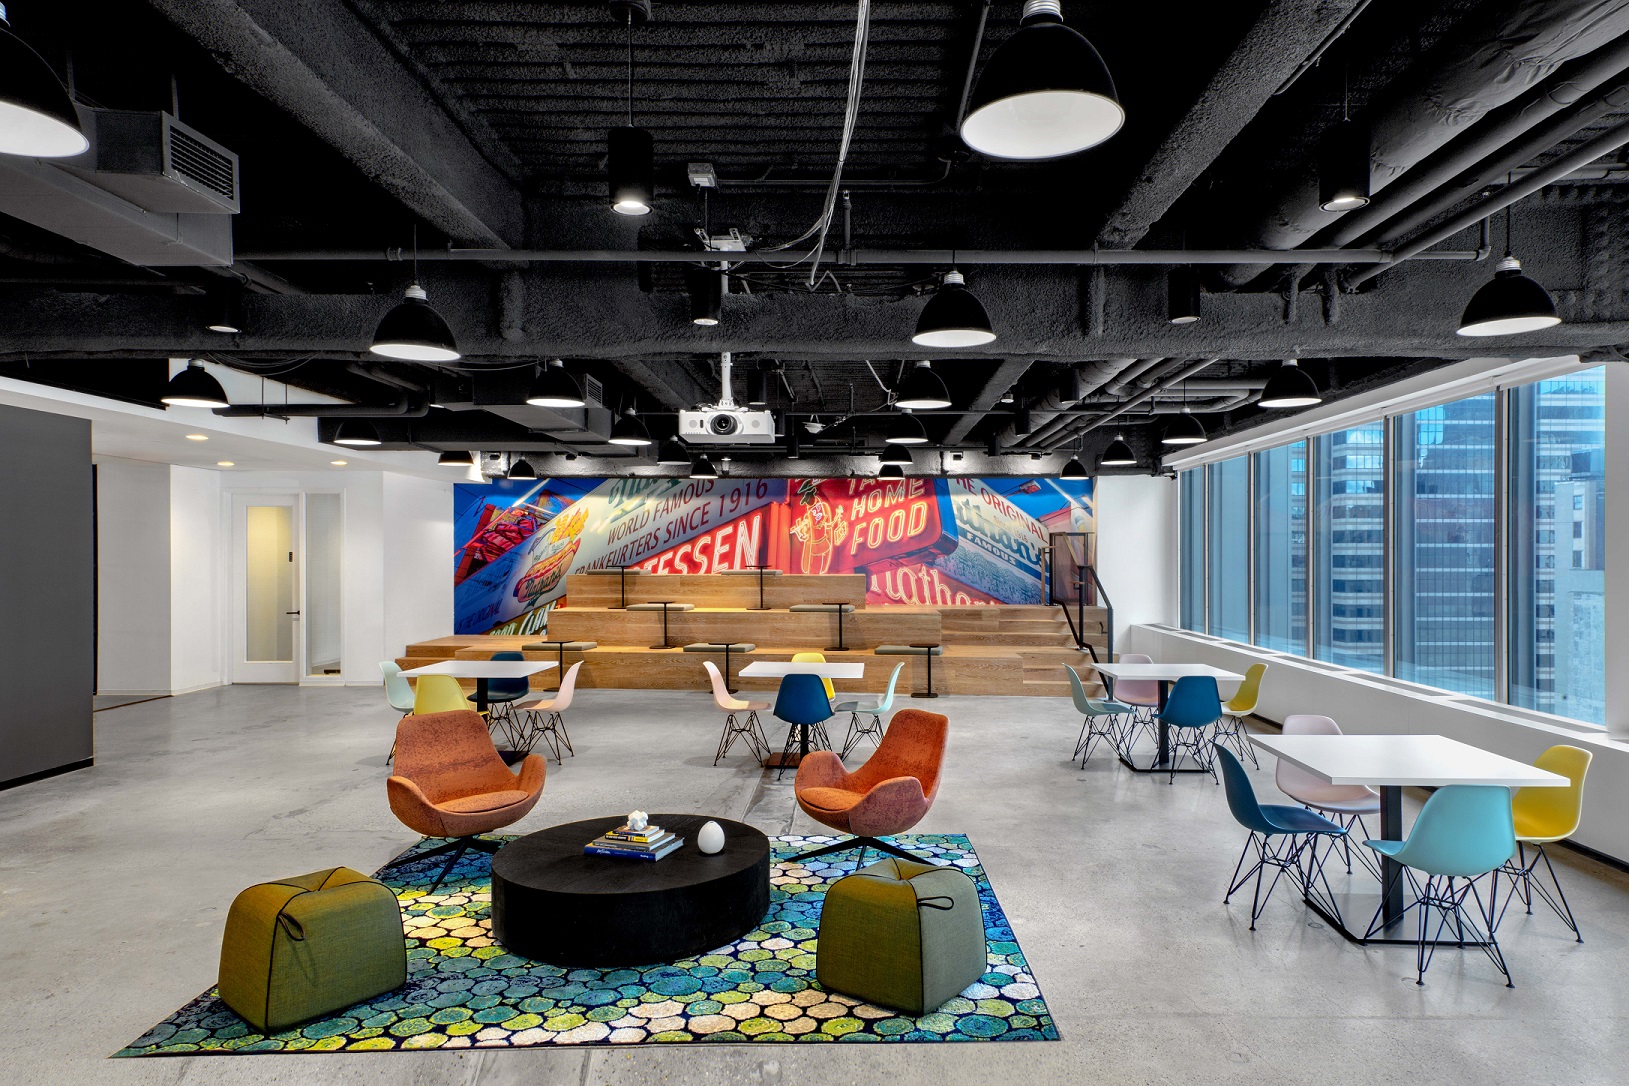 Booking.com NYC. Image courtesy of from Addie Godwin via TPG Architecture